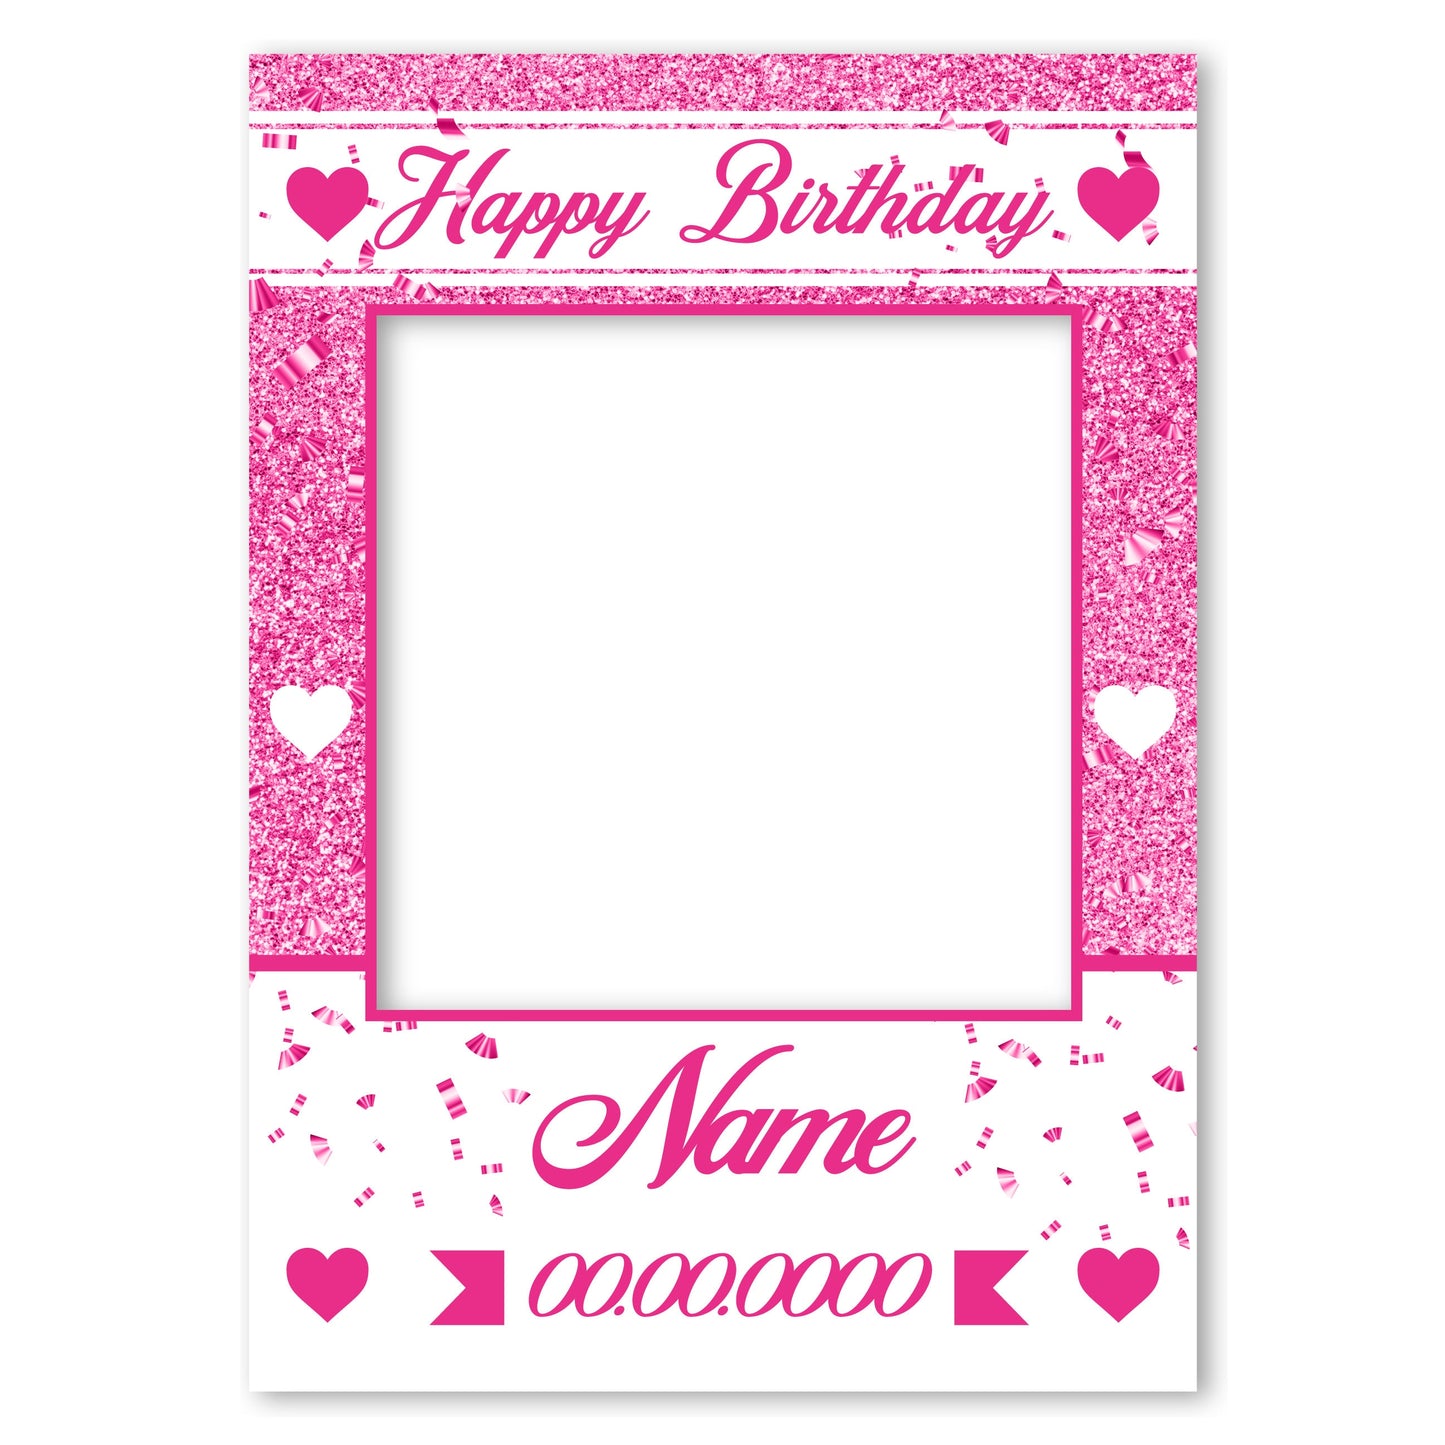 PERSONALISED SELFIE FRAME 0034 Name Age Pink Hearts Glitter Effect Selfie Frame Props Party Happy Birthday Decoration 0034